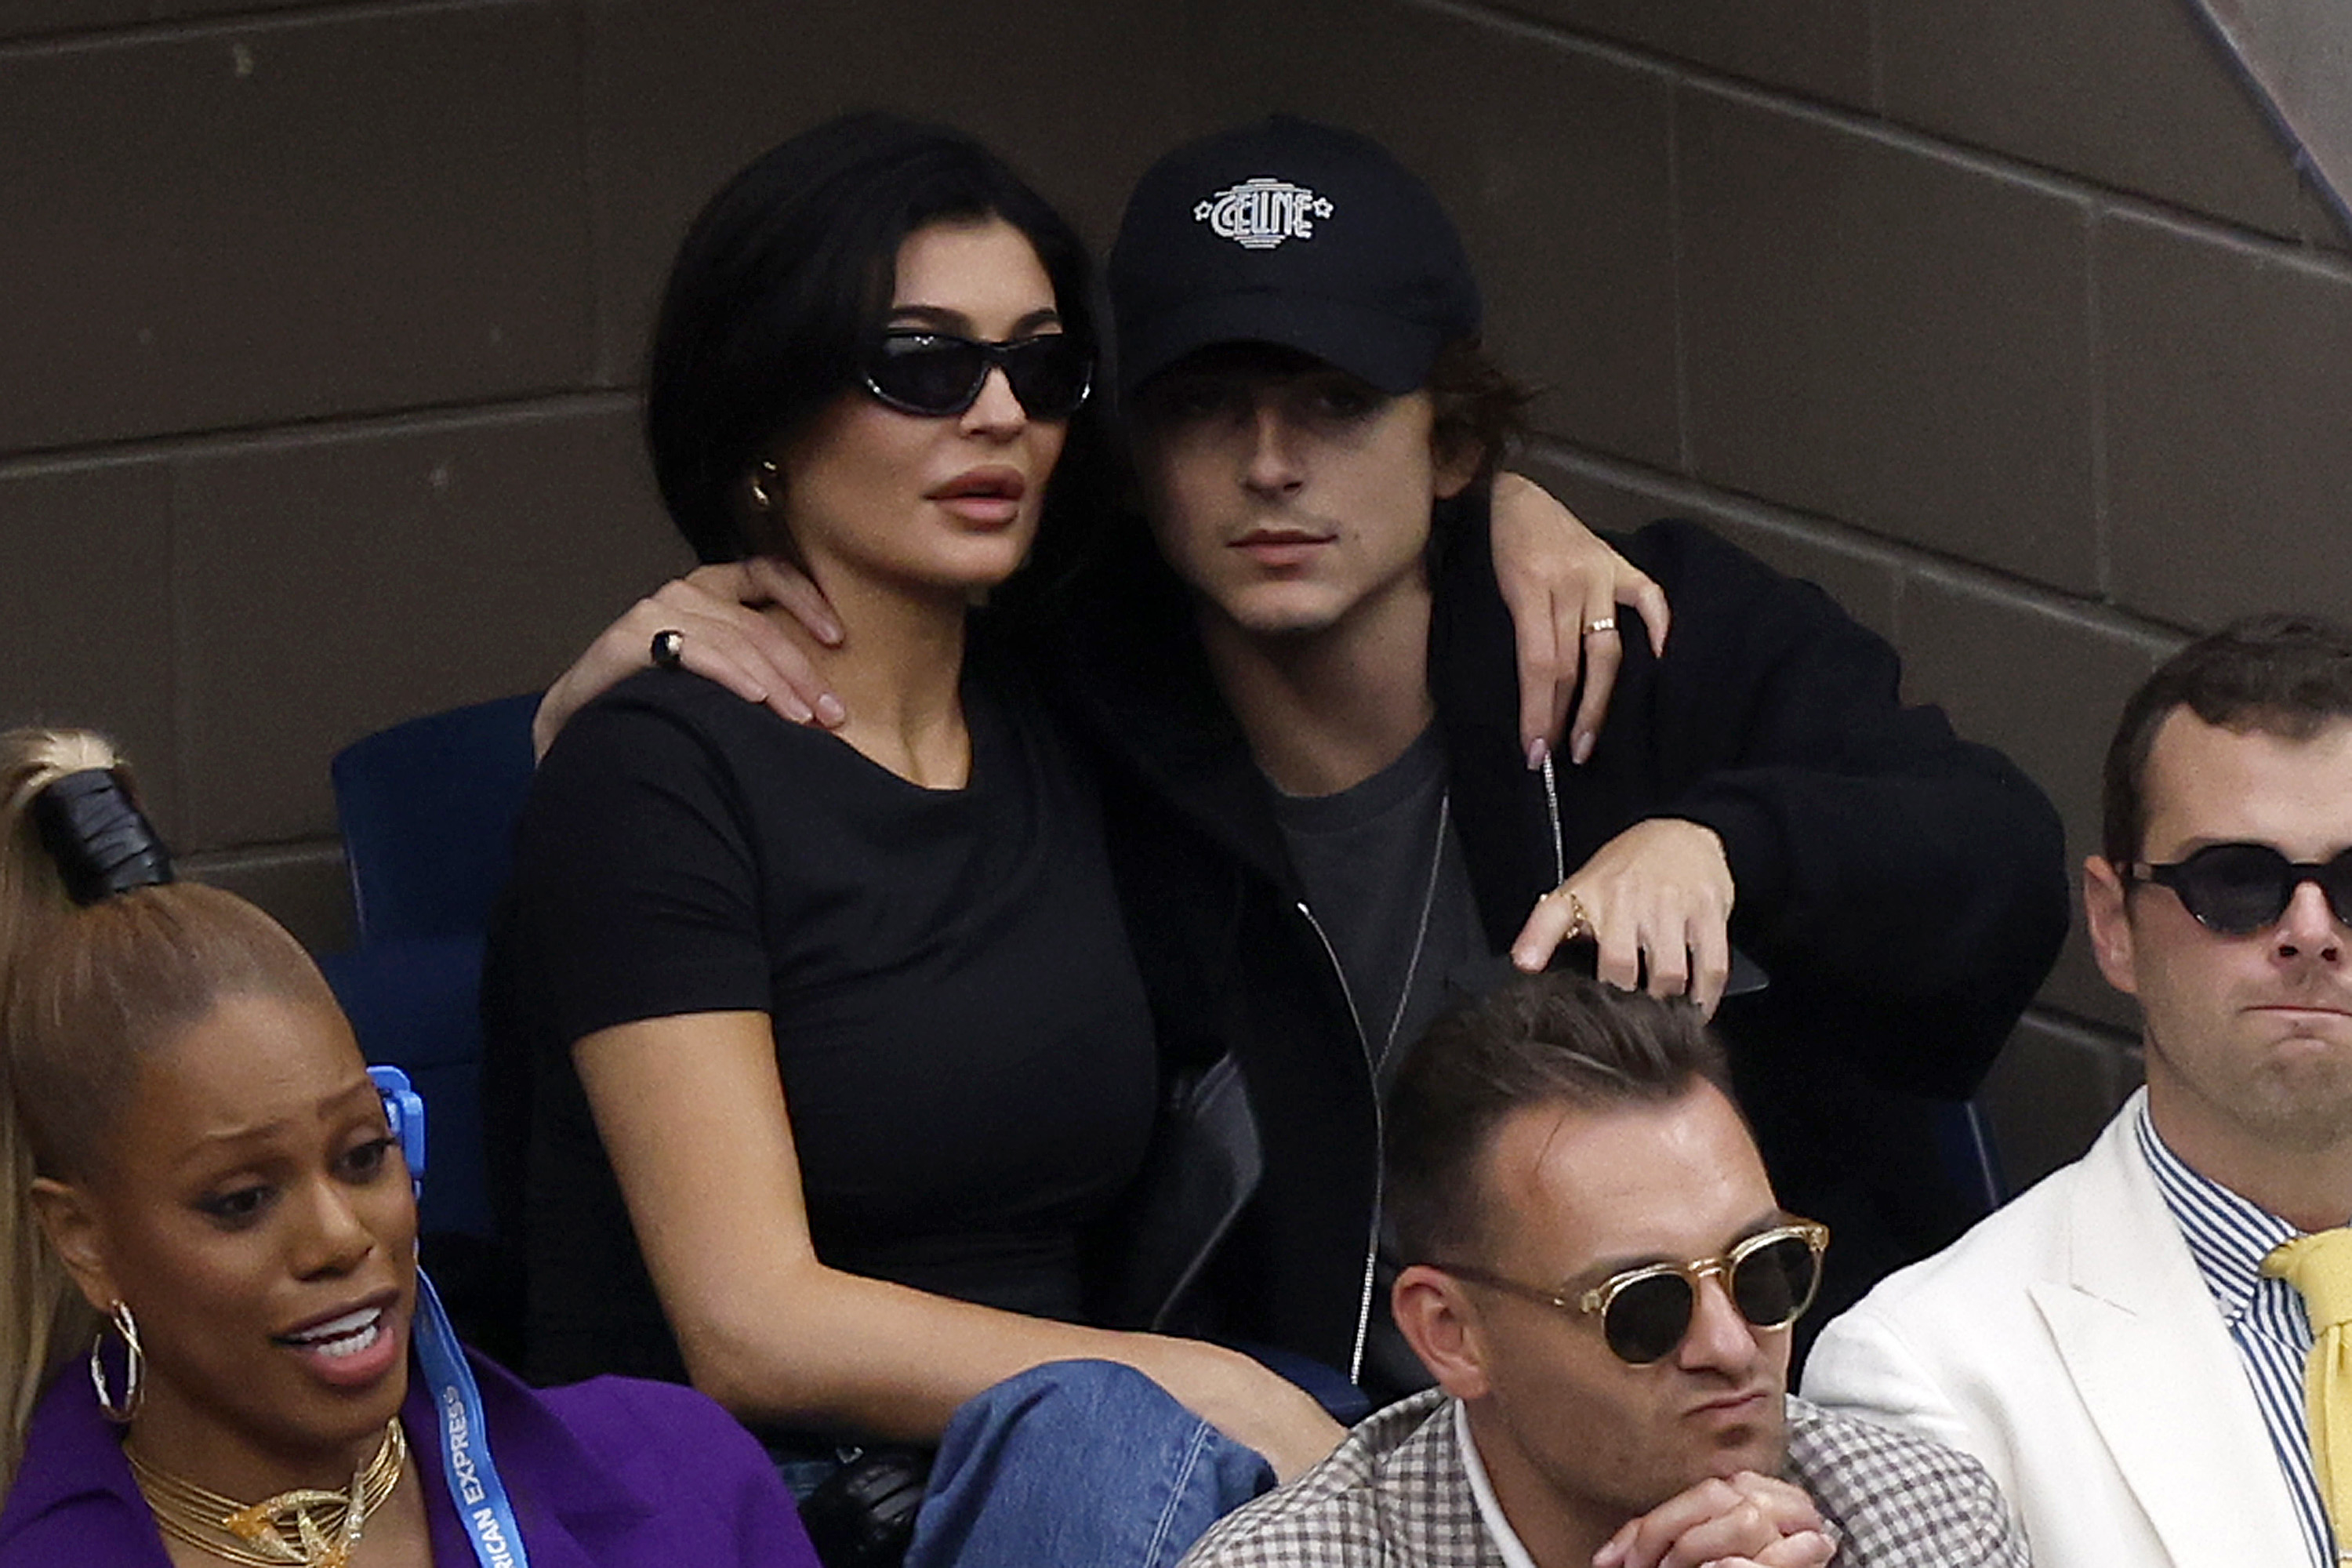 Kylie and Timothée at the US Open